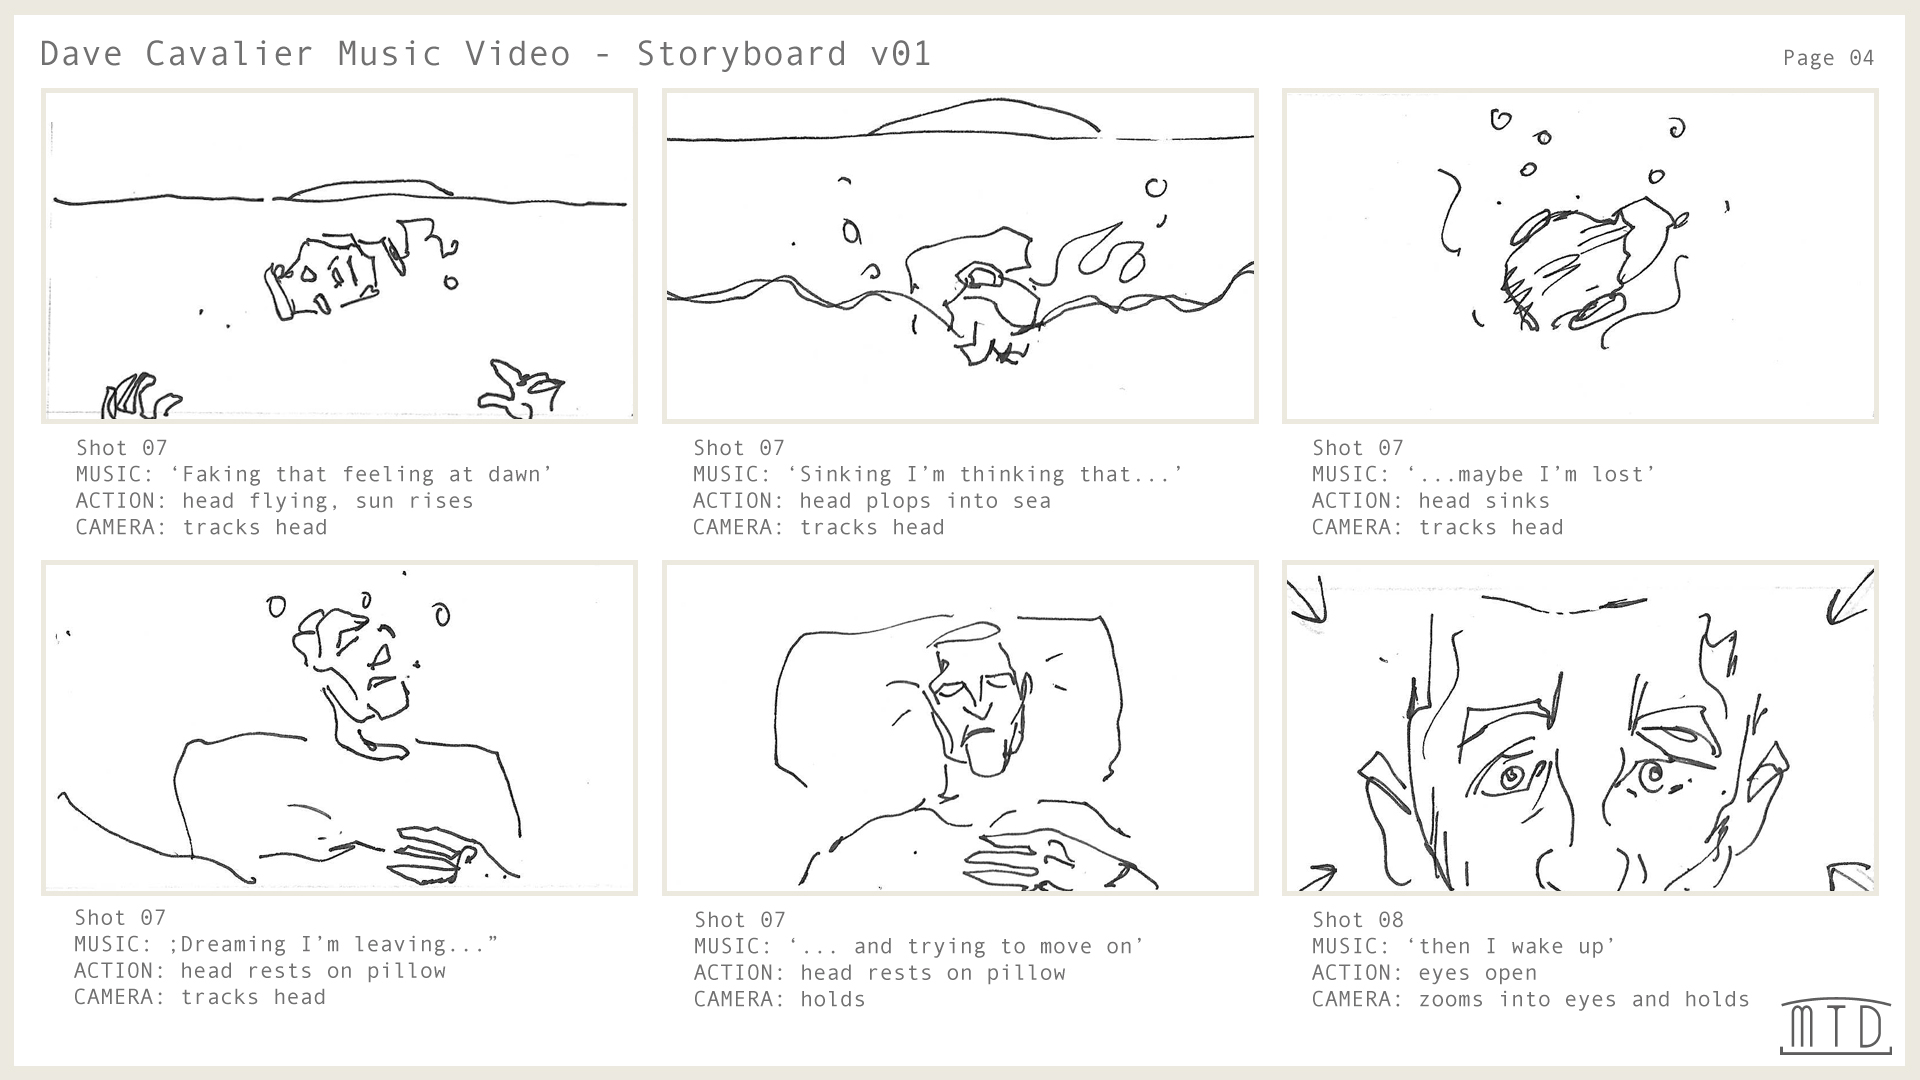 The Hold storyboard page 4